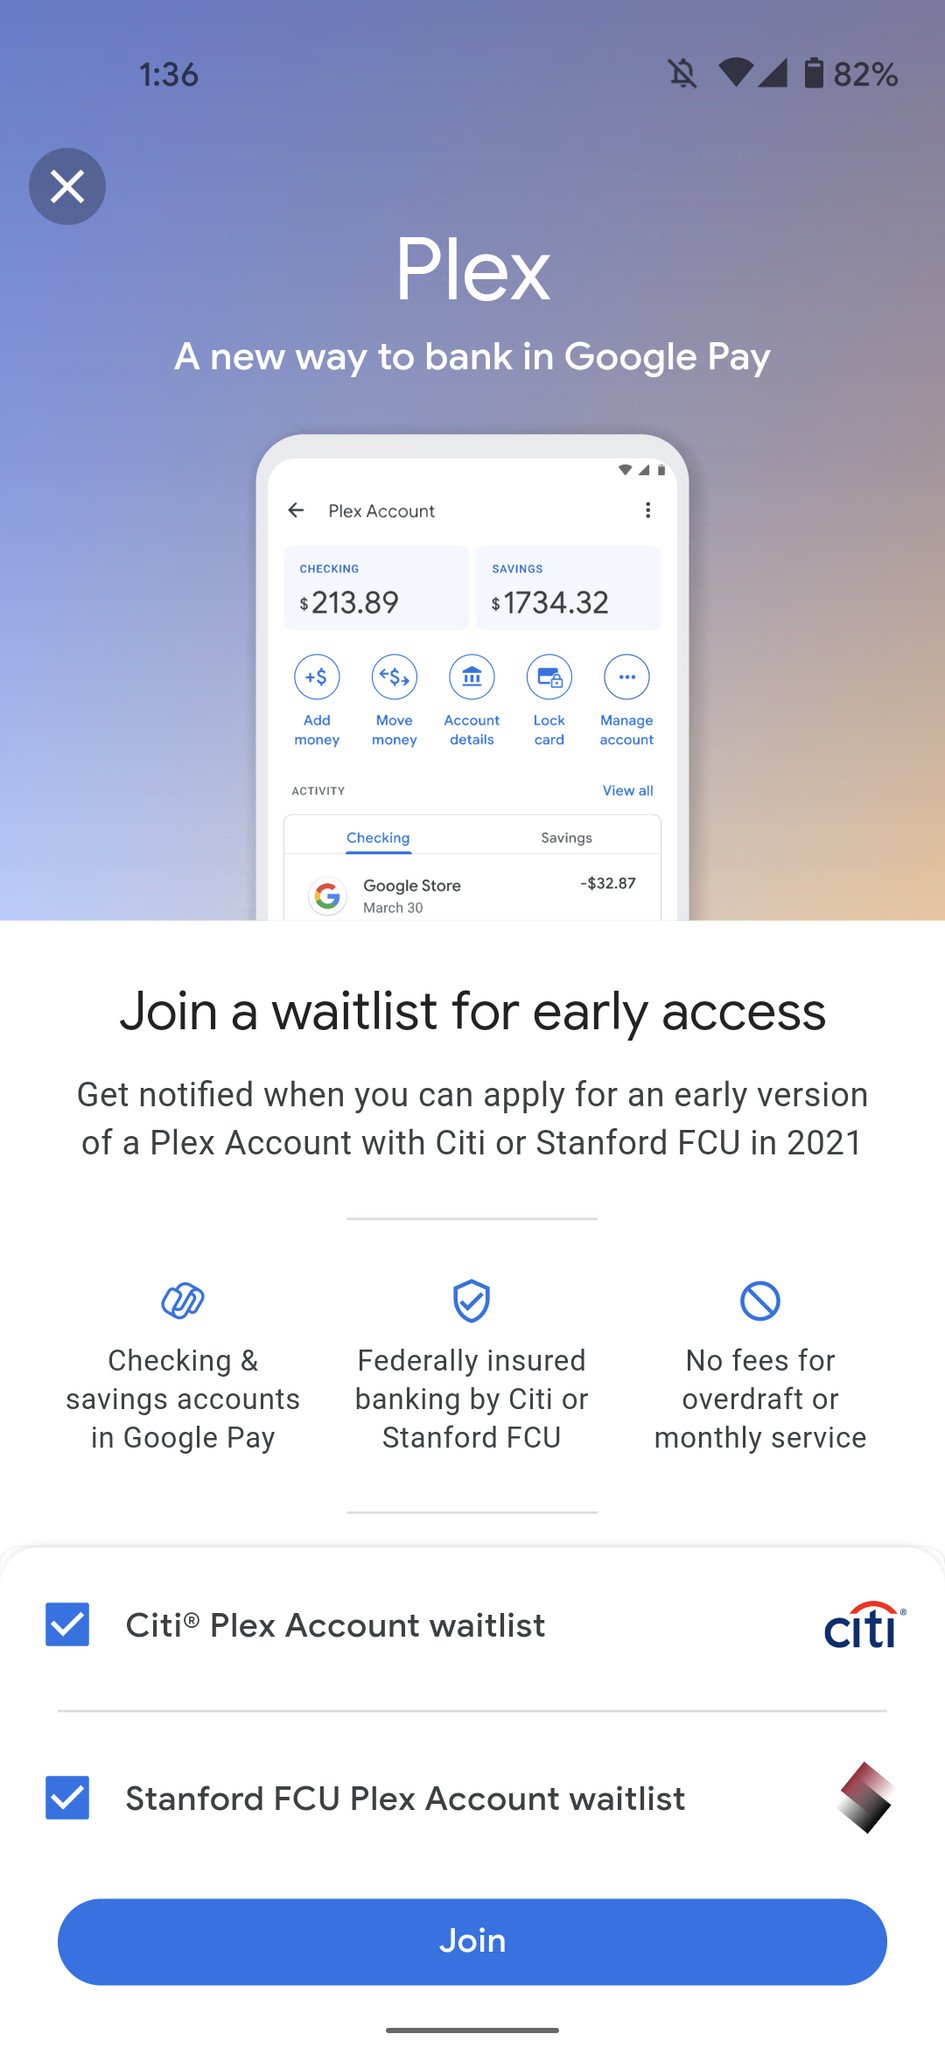 How to sign up for Google Plex waitlist